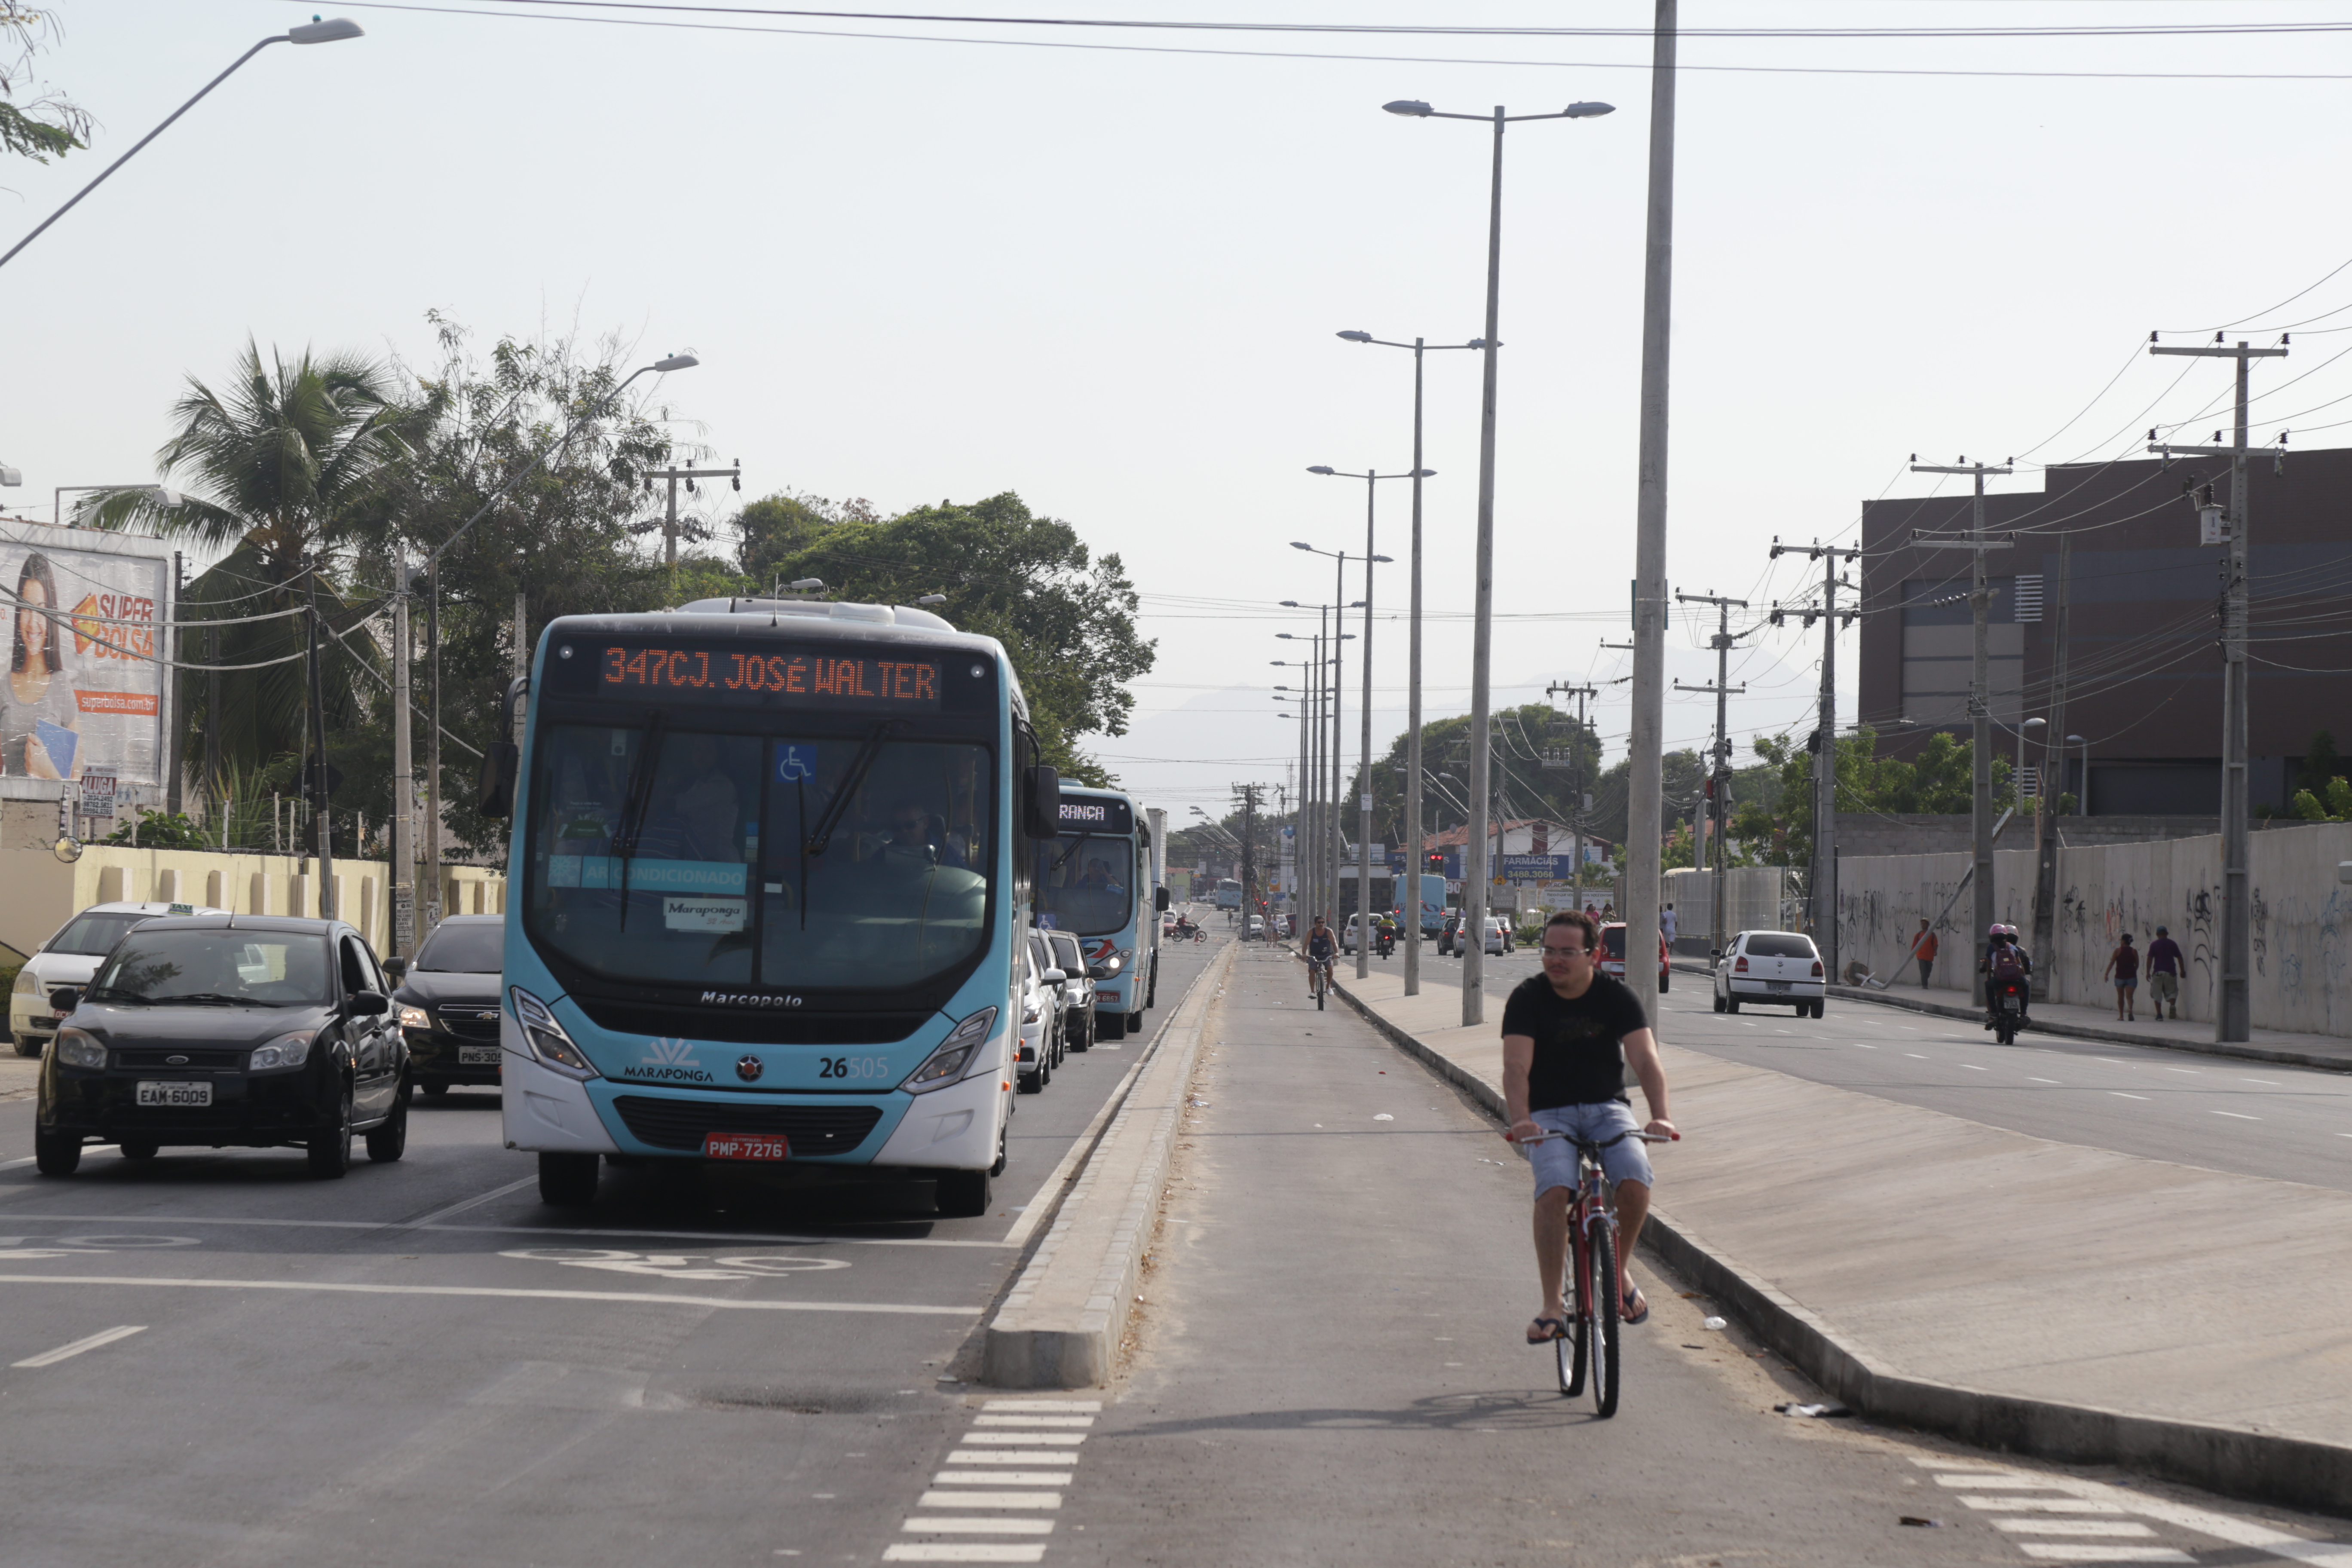 Fortaleza is one of 10 cities pre-selected for the Toyota Mobility Foundation’s Sustainable Cities Challenge.